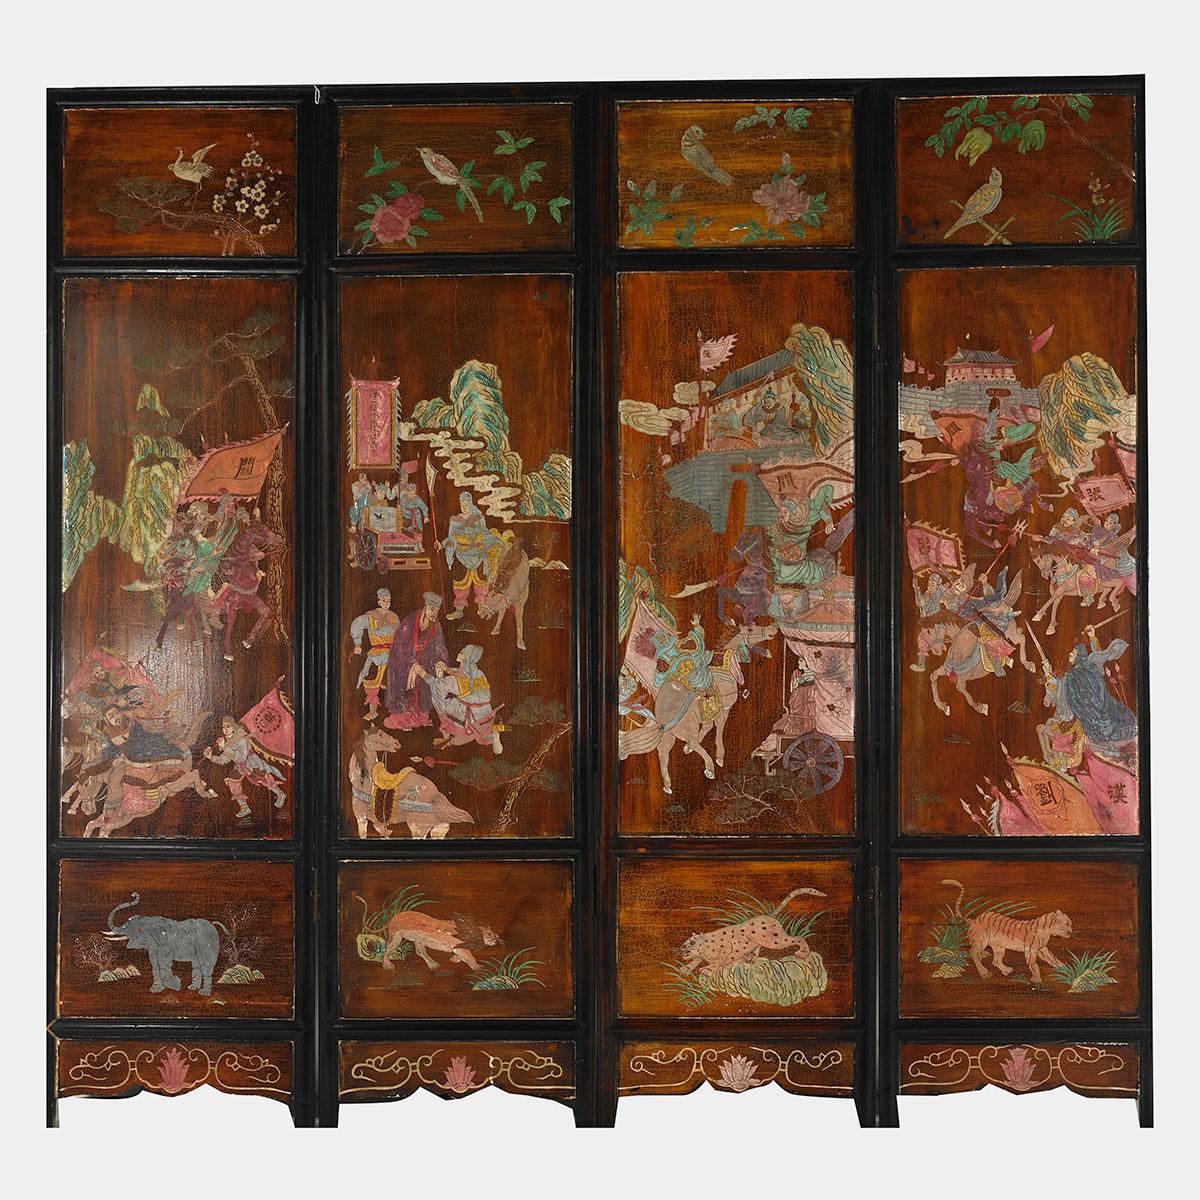 Red Lacquer Four Panel Screen